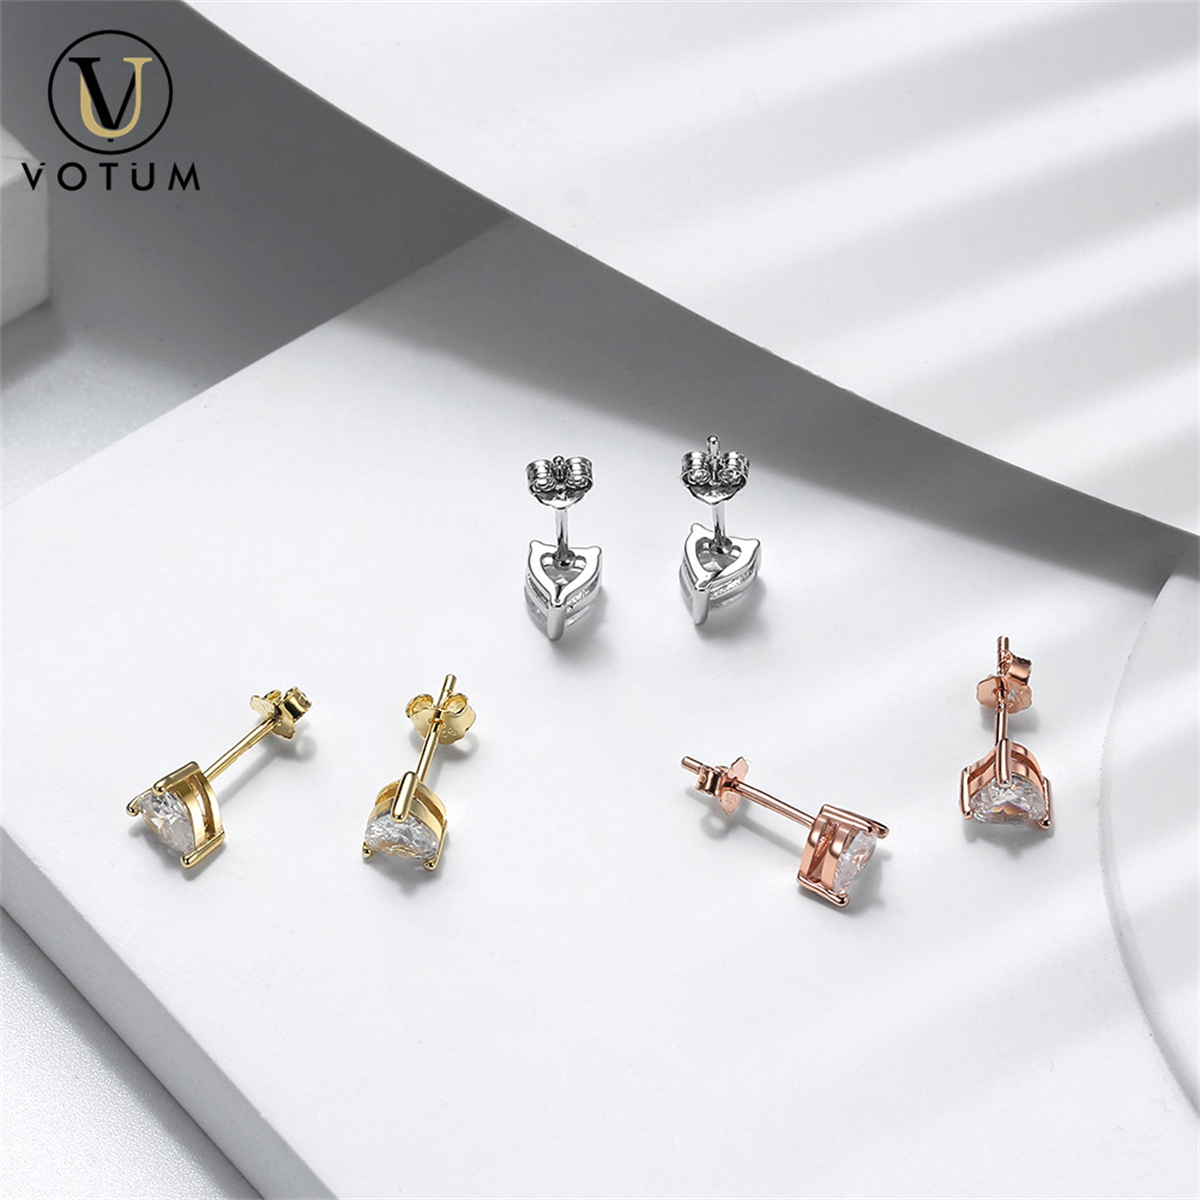 Votum Factory Wholesale Fashion Heart 9K Solid Gold Stud Earring with Sparking Lab Grown Diamonds Custom Fine Jewelry Jewellery Accessories